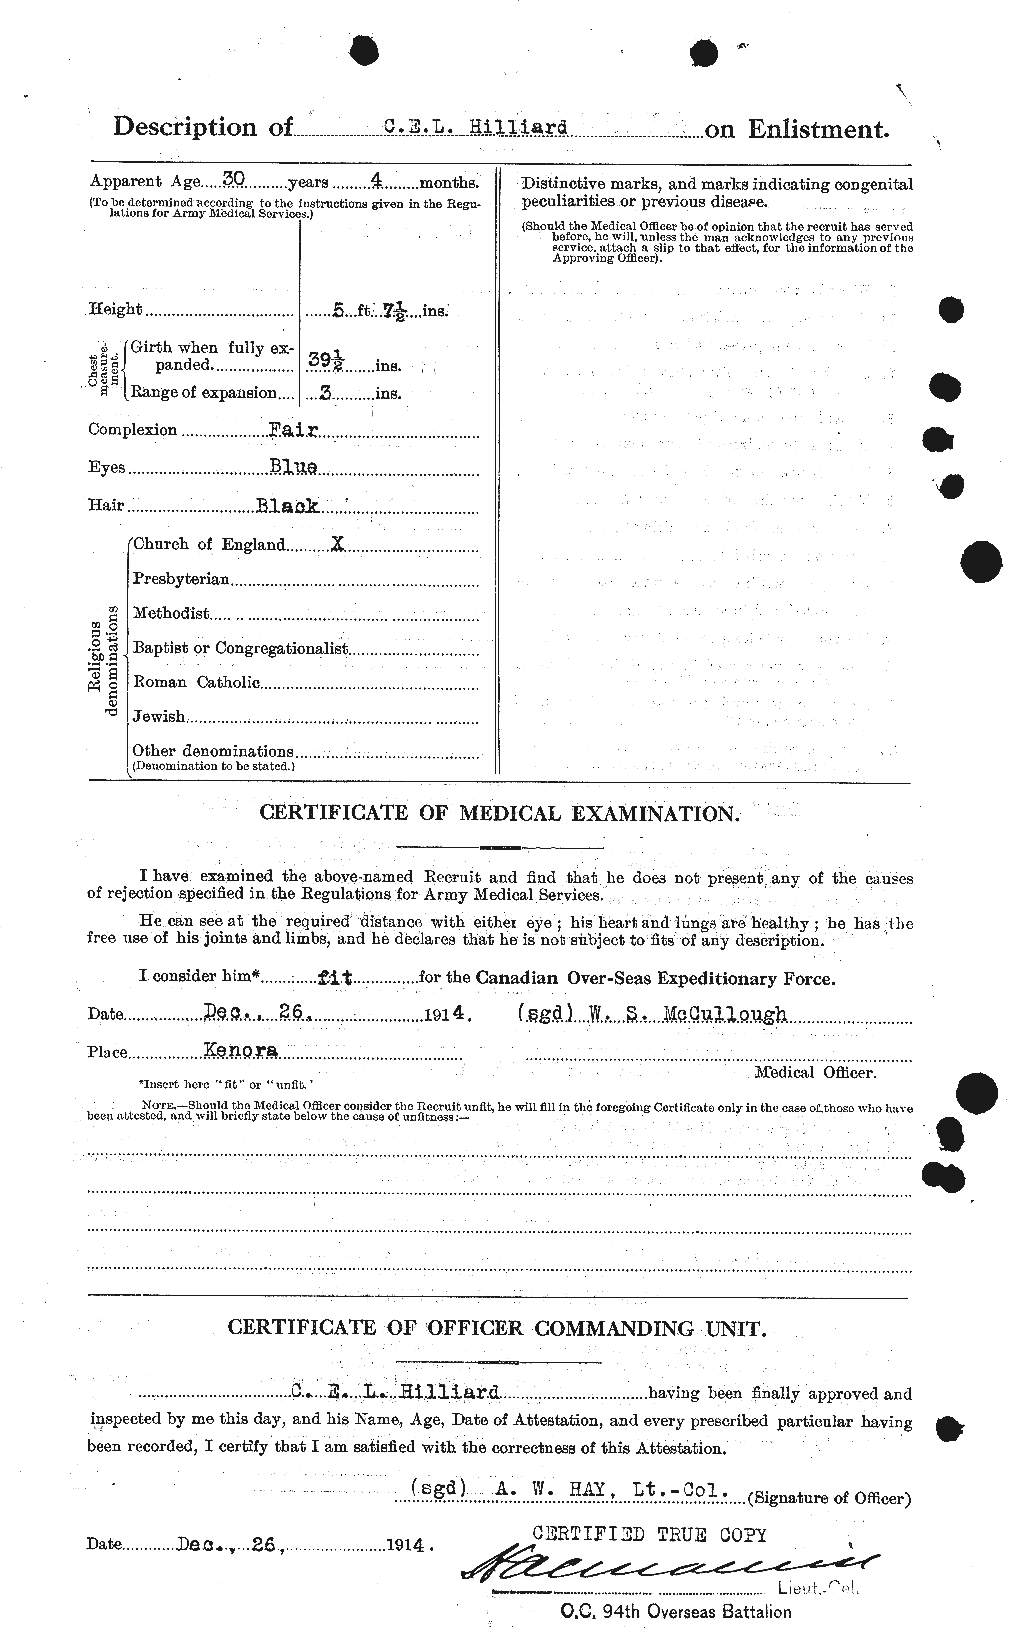 Personnel Records of the First World War - CEF 393602b